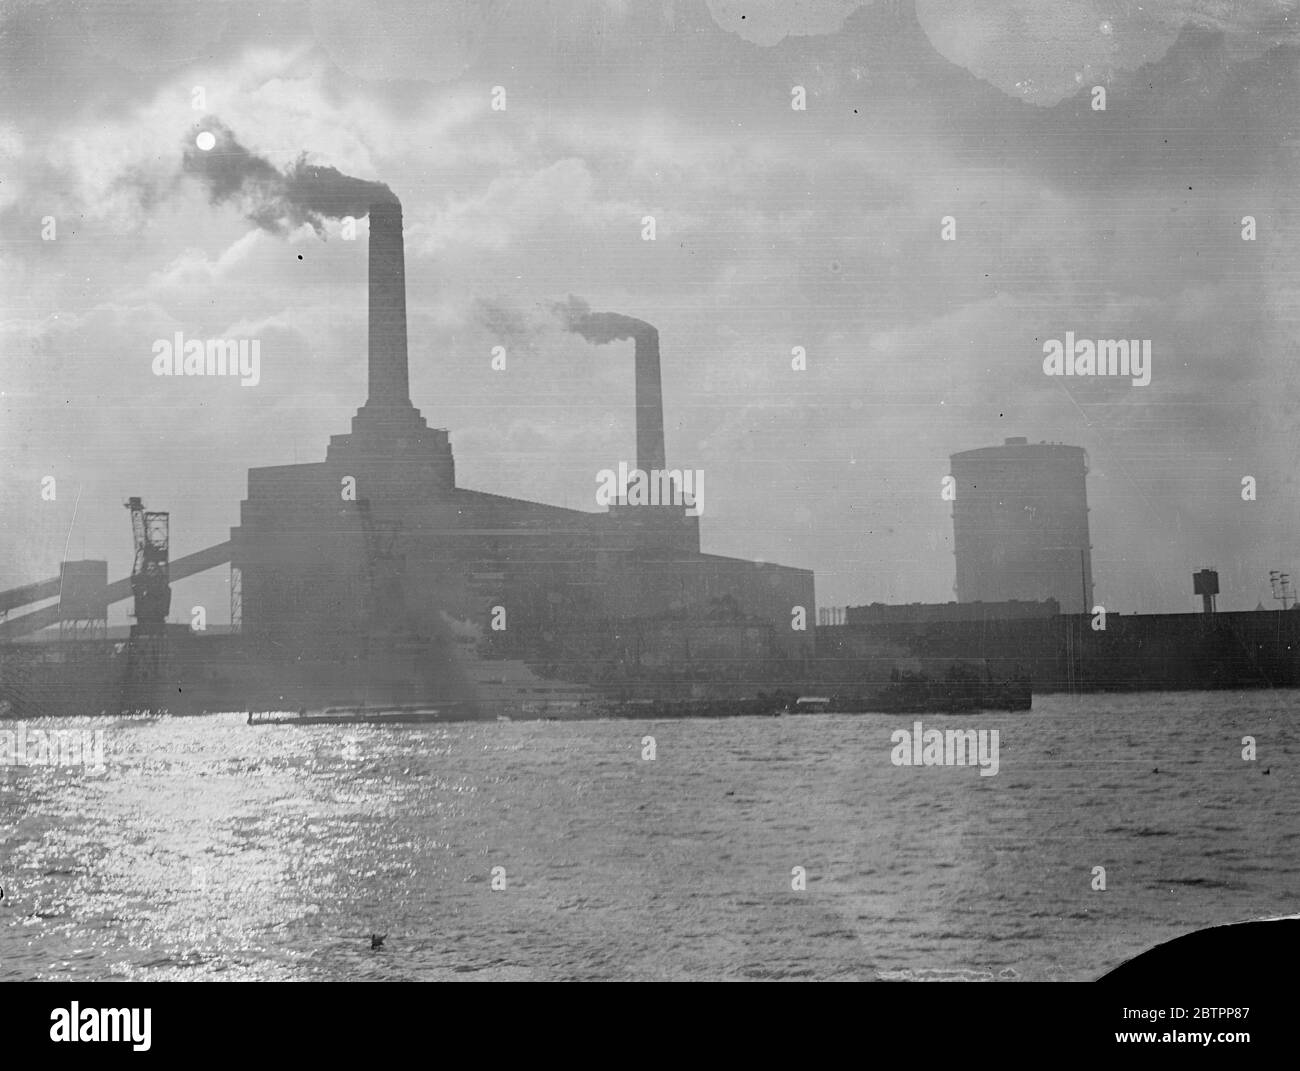 Dark giants of power!. Towering, graceful stacks of the Battersea Power Station with the streamers of smoke belching against a cloudy sky, cranes, and tugs puffing by on the sun sparkled river give an impression of the 'industrial Thames' source of London's power and wealth. 28 January 1938 Stock Photo